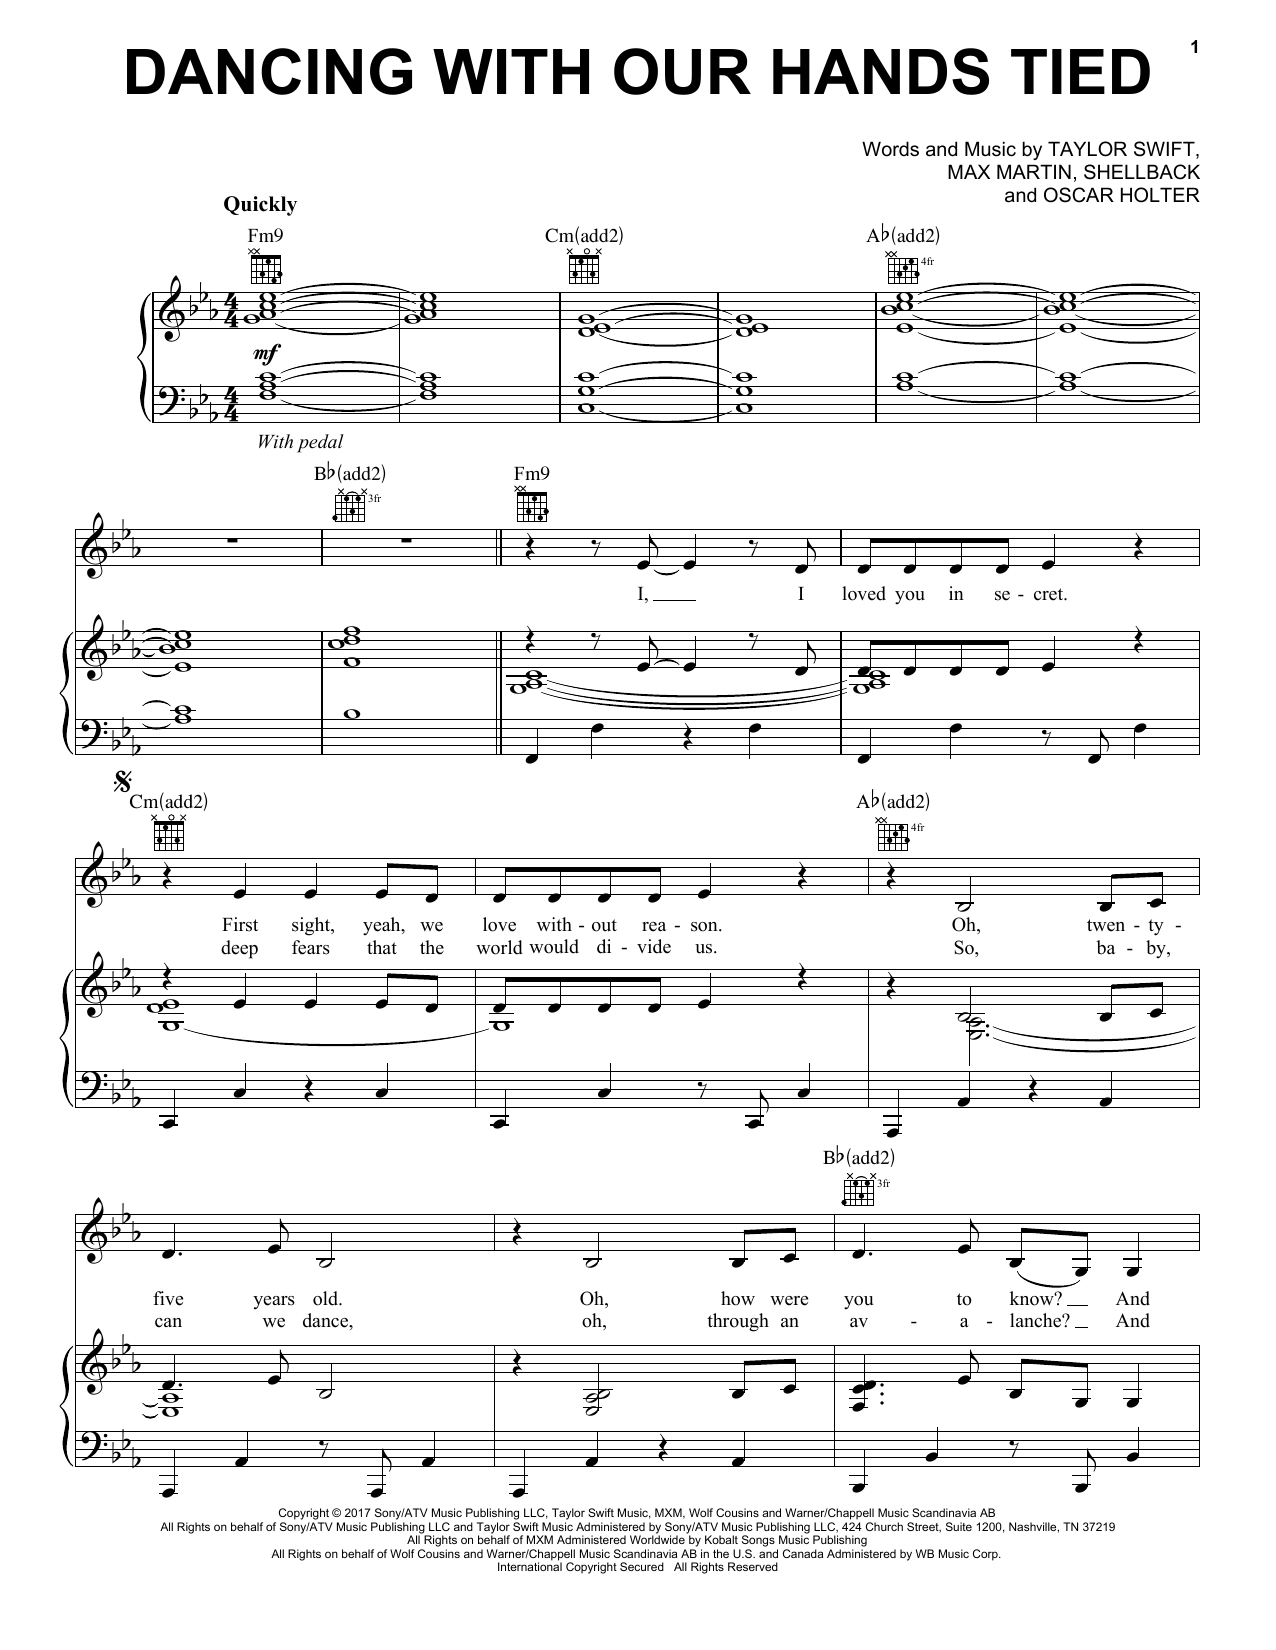 Download Taylor Swift Dancing With Our Hands Tied Sheet Music